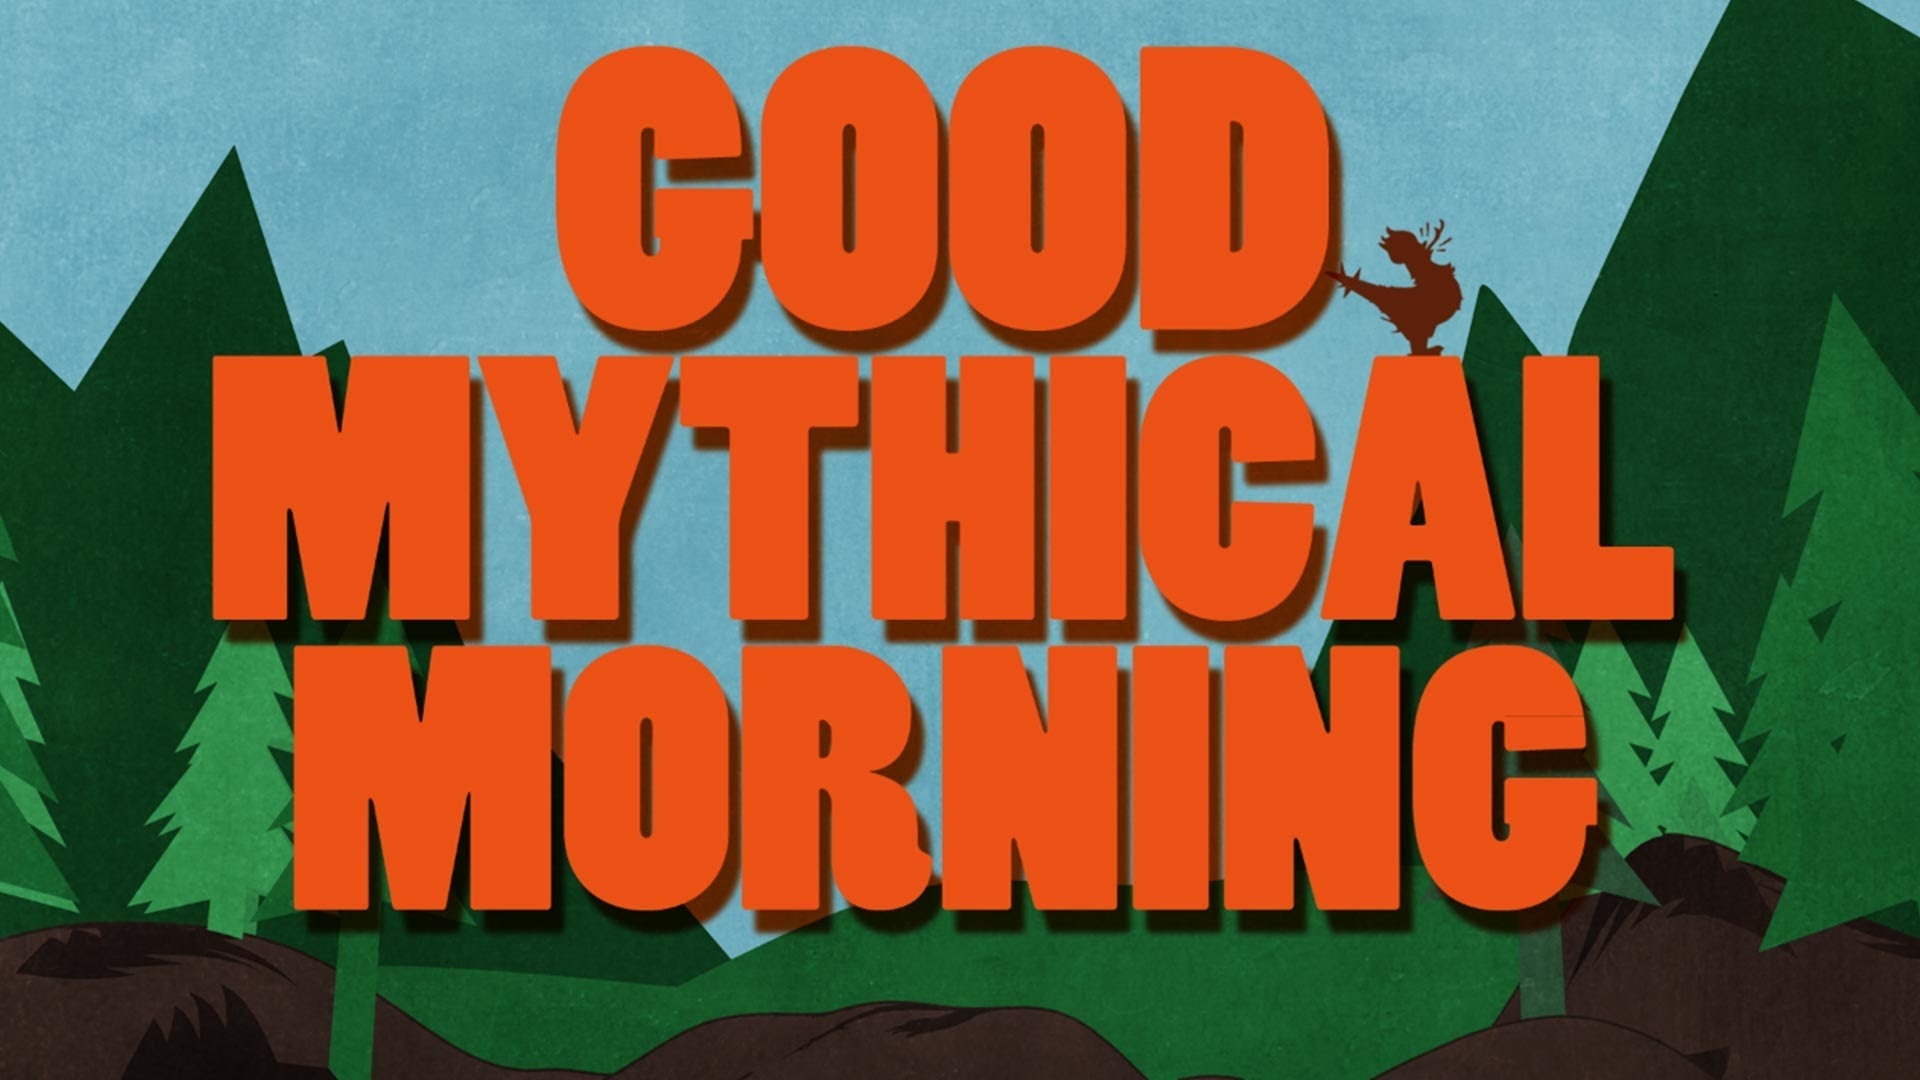 Good Mythical Morning, 50 wallpapers, Mythical morning, Amazing157, 1920x1080 Full HD Desktop